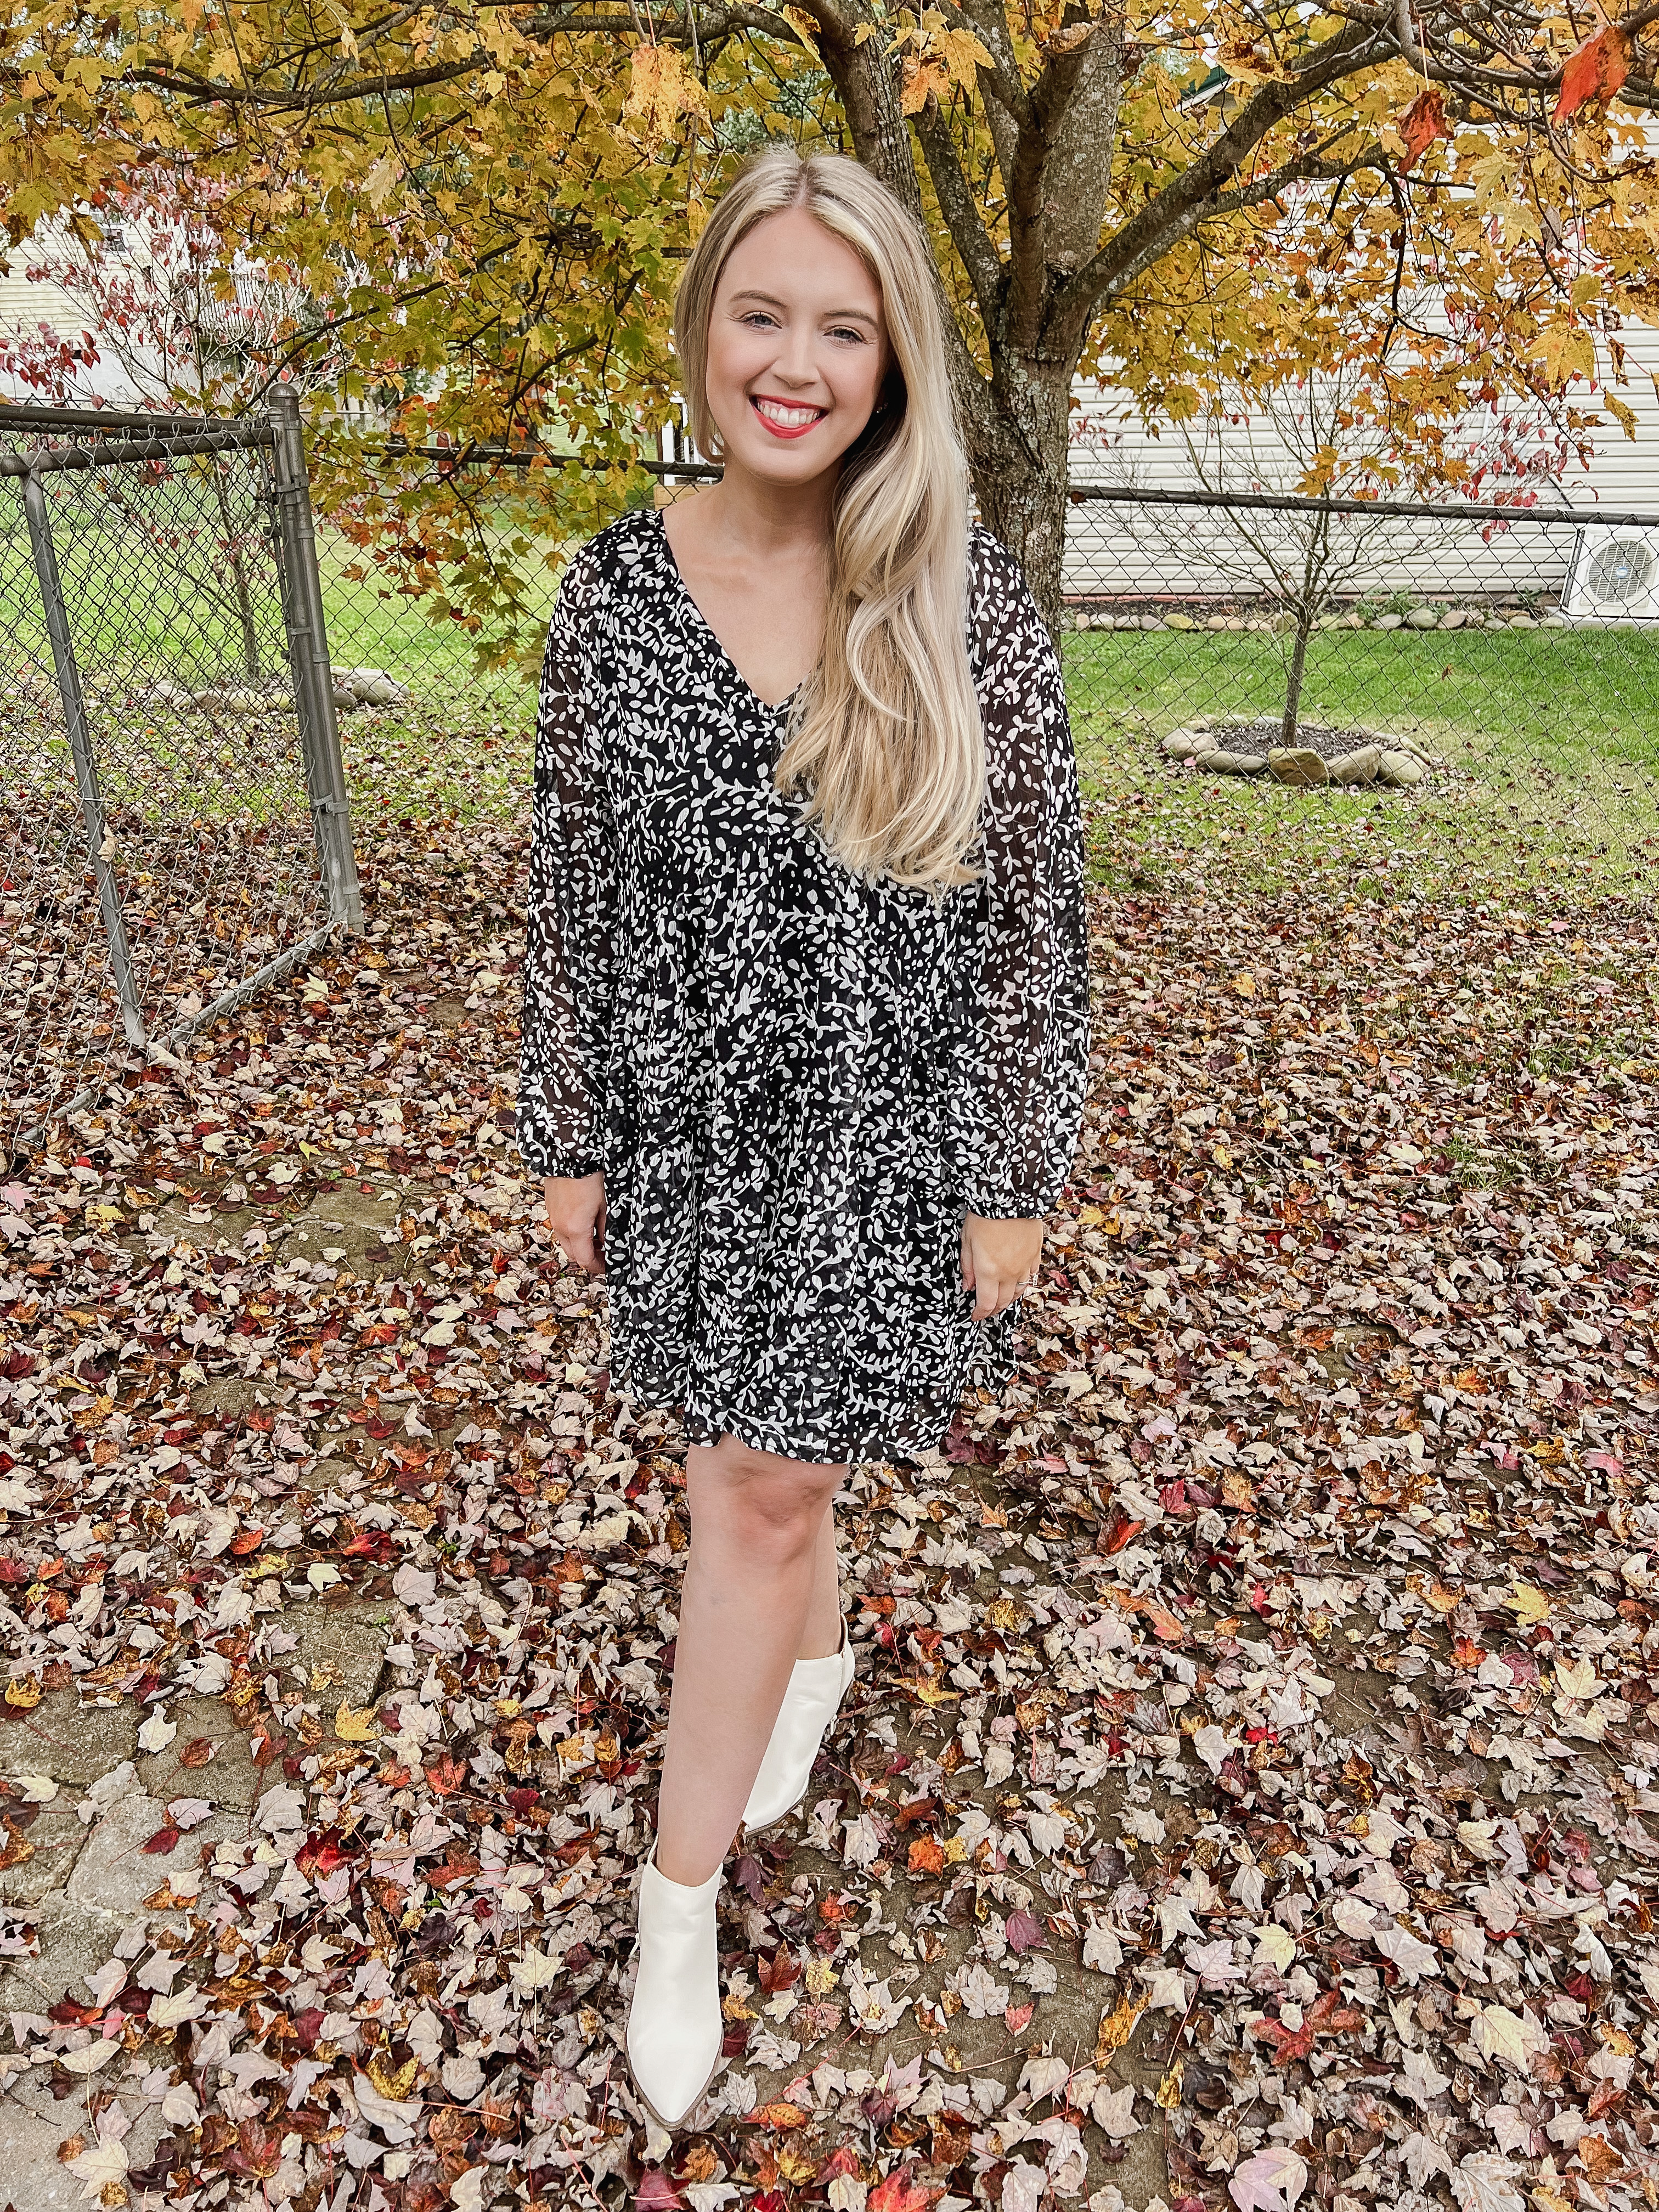 Walmart Affordable Fall and Winter Fashion